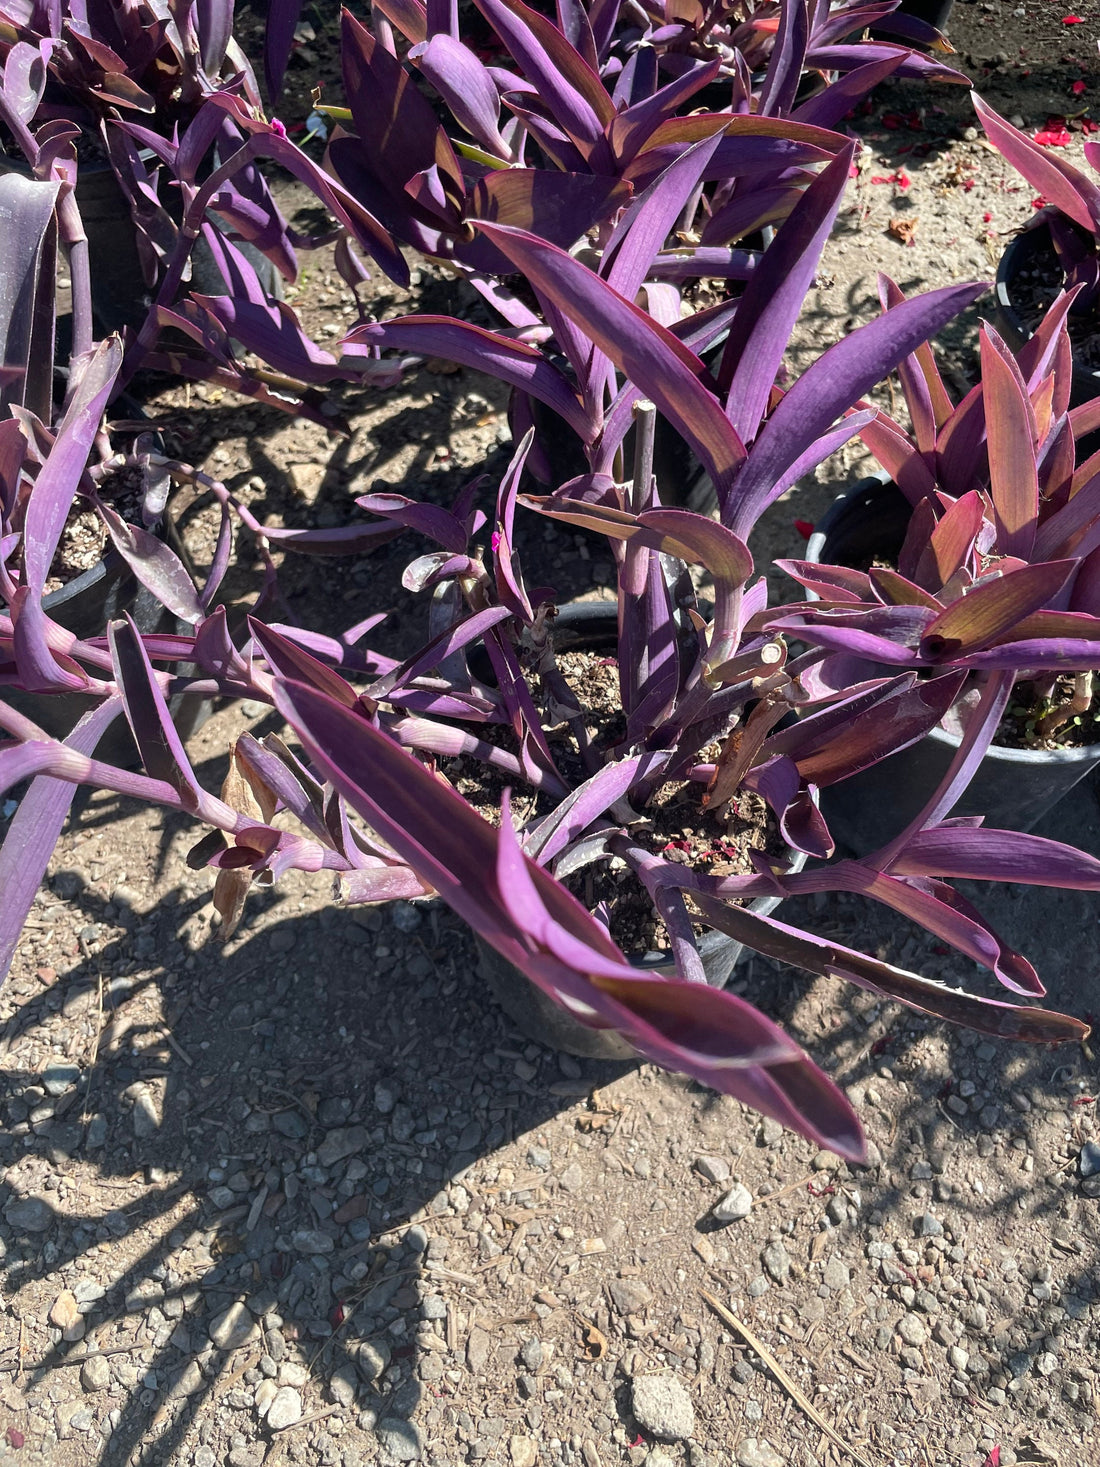 Xtra Large 6 inch pot live plant -Tradescantia Purple Heart-| Succulent-Like -Hard to Find this size